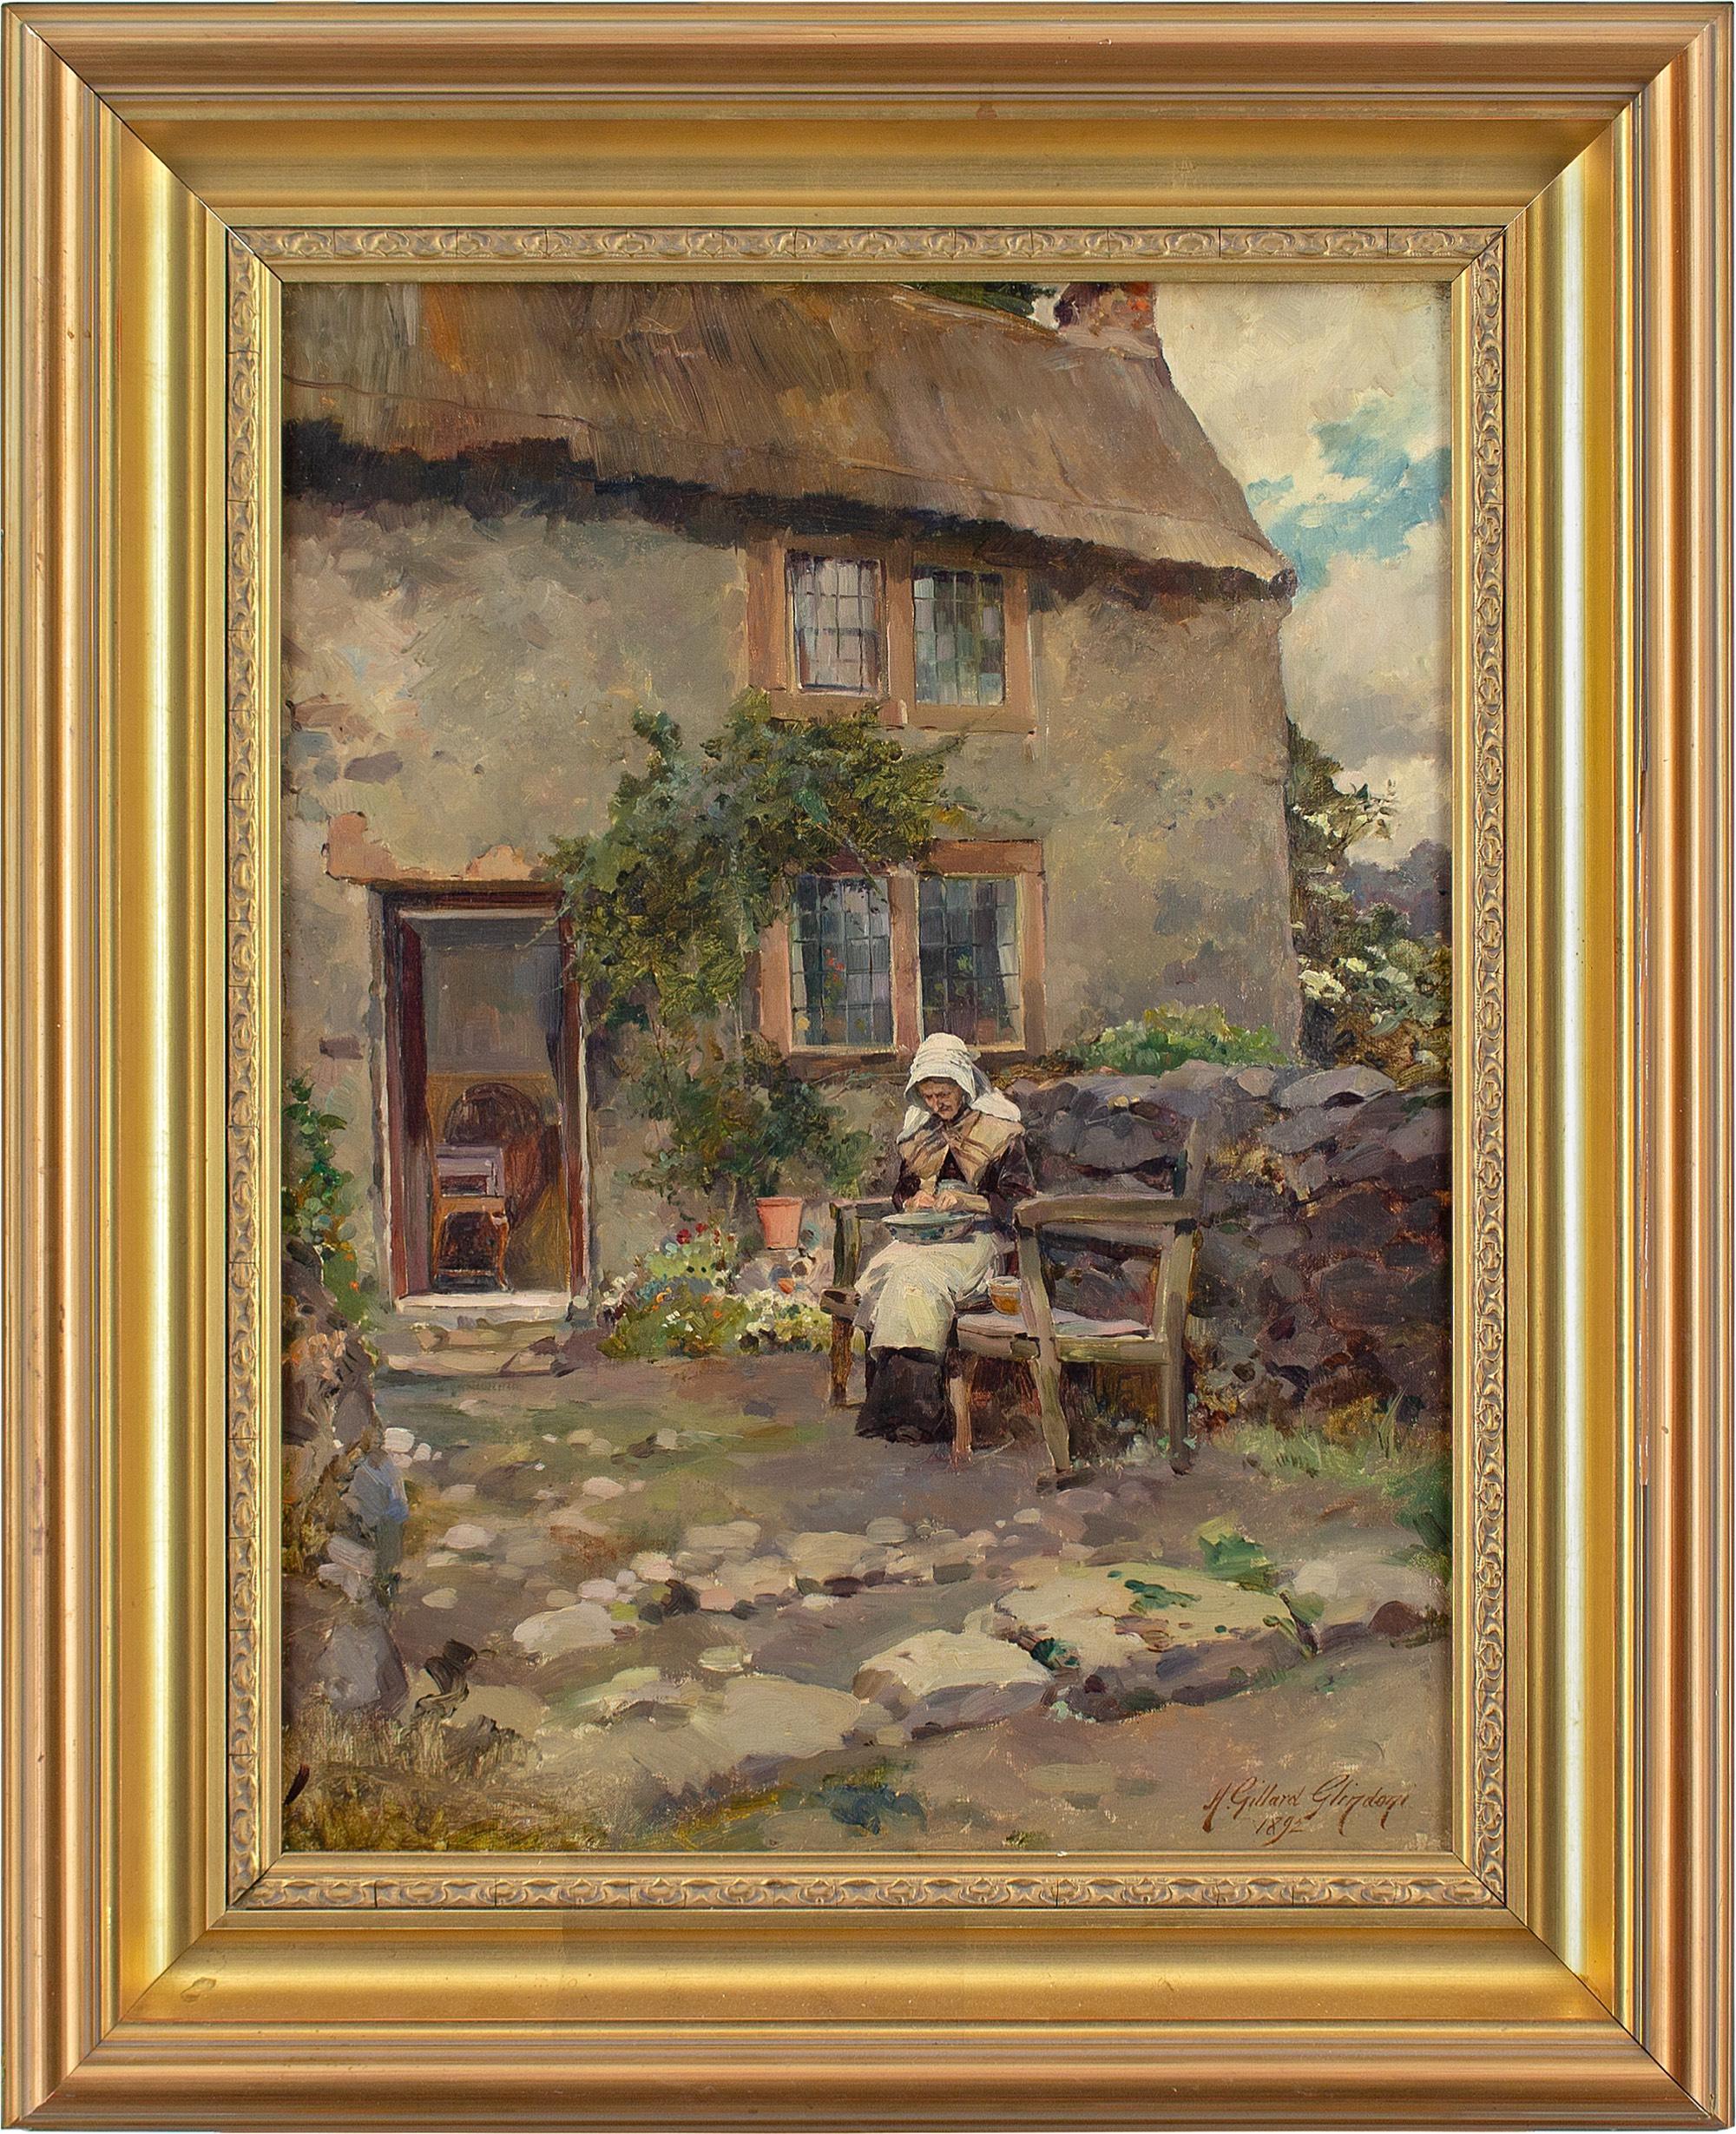 This late 19th-century oil painting by British artist Henry Gillard Glindoni (1852-1913) depicts an older woman by a rustic stone cottage.

Perched upon a creaky wooden bench, she prepares a daily meal. Sat outside in the elements under a typically